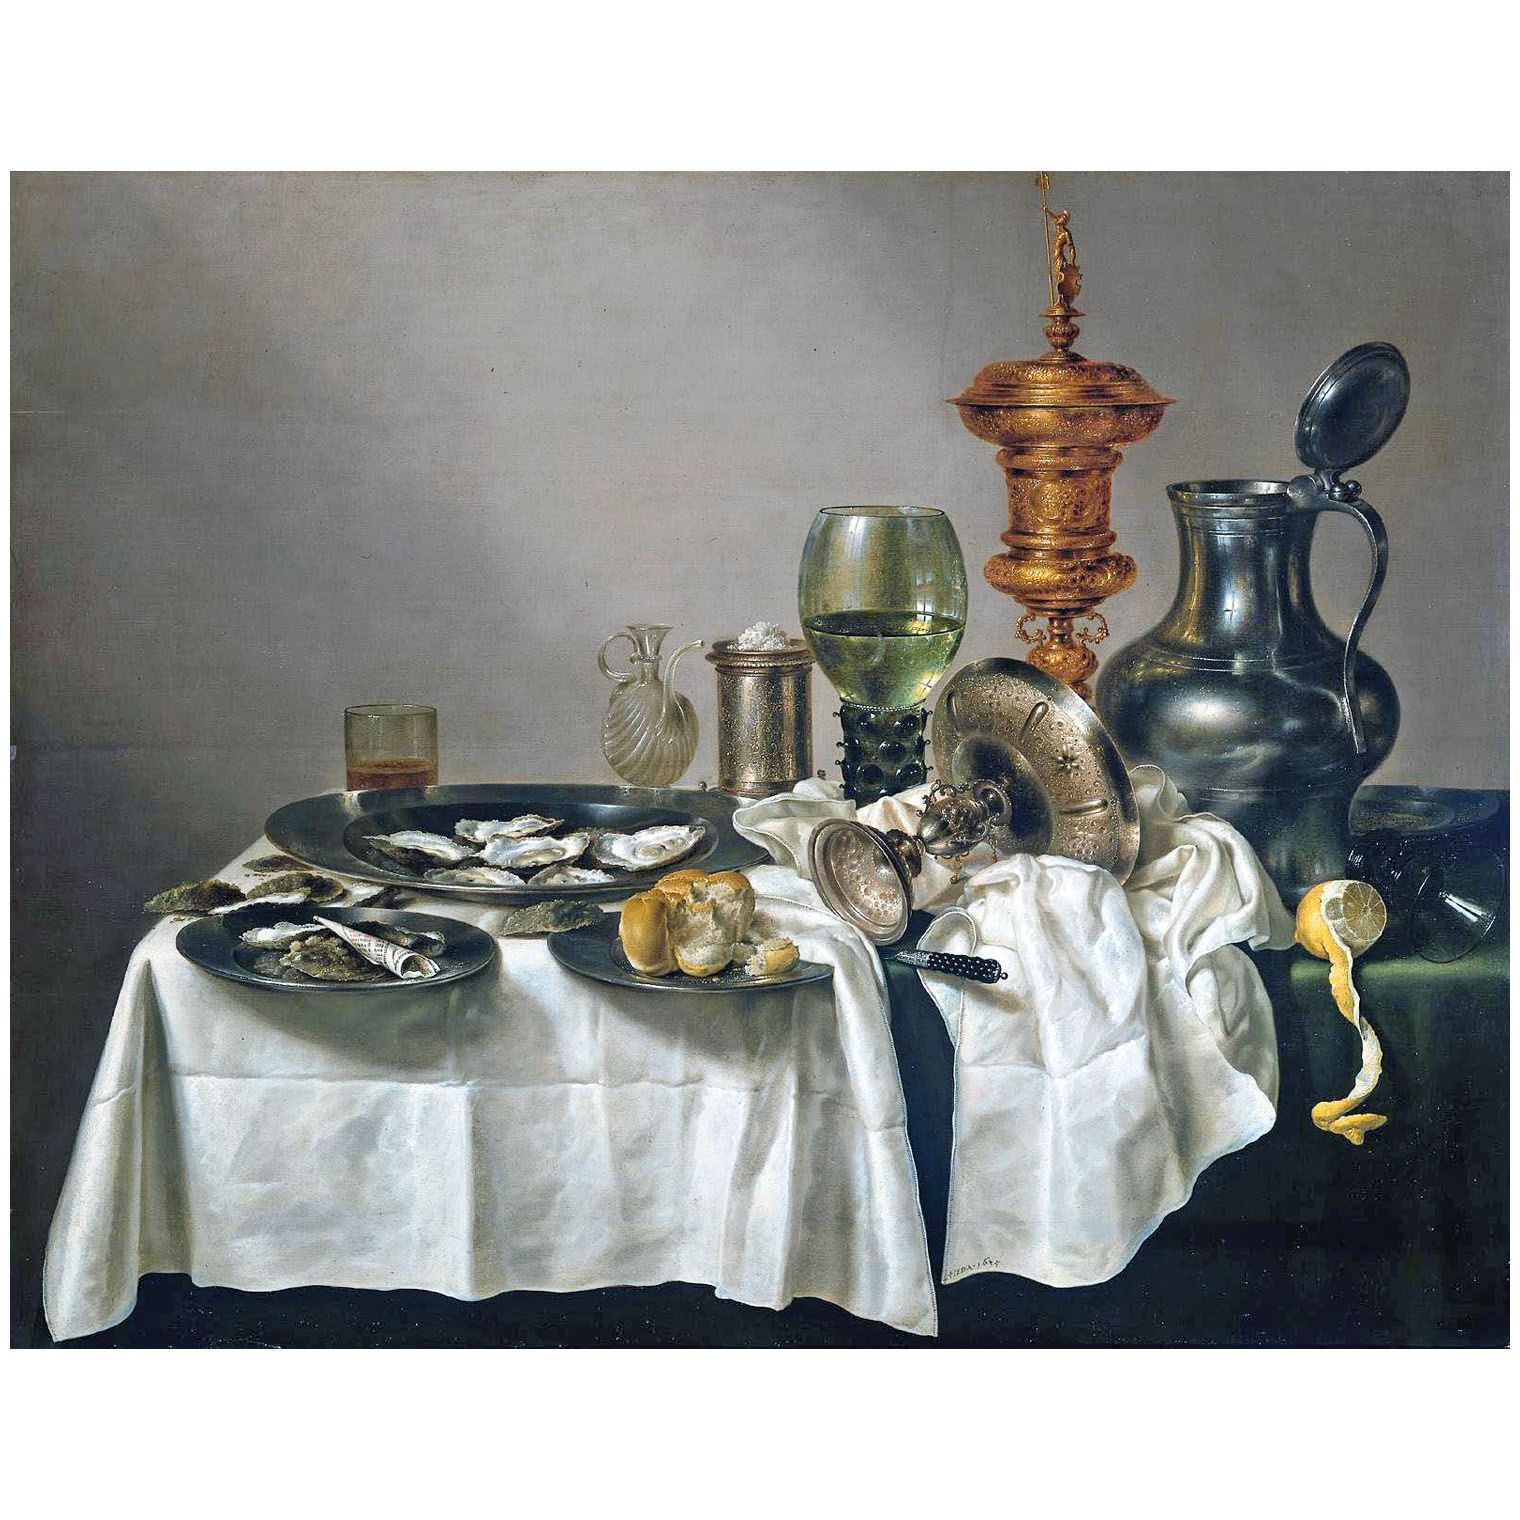 Willem Claesz Heda. Still-Life with Oysters, Lemon and a Silver Bowl. 1635. Rijksmuseum Amsterdam